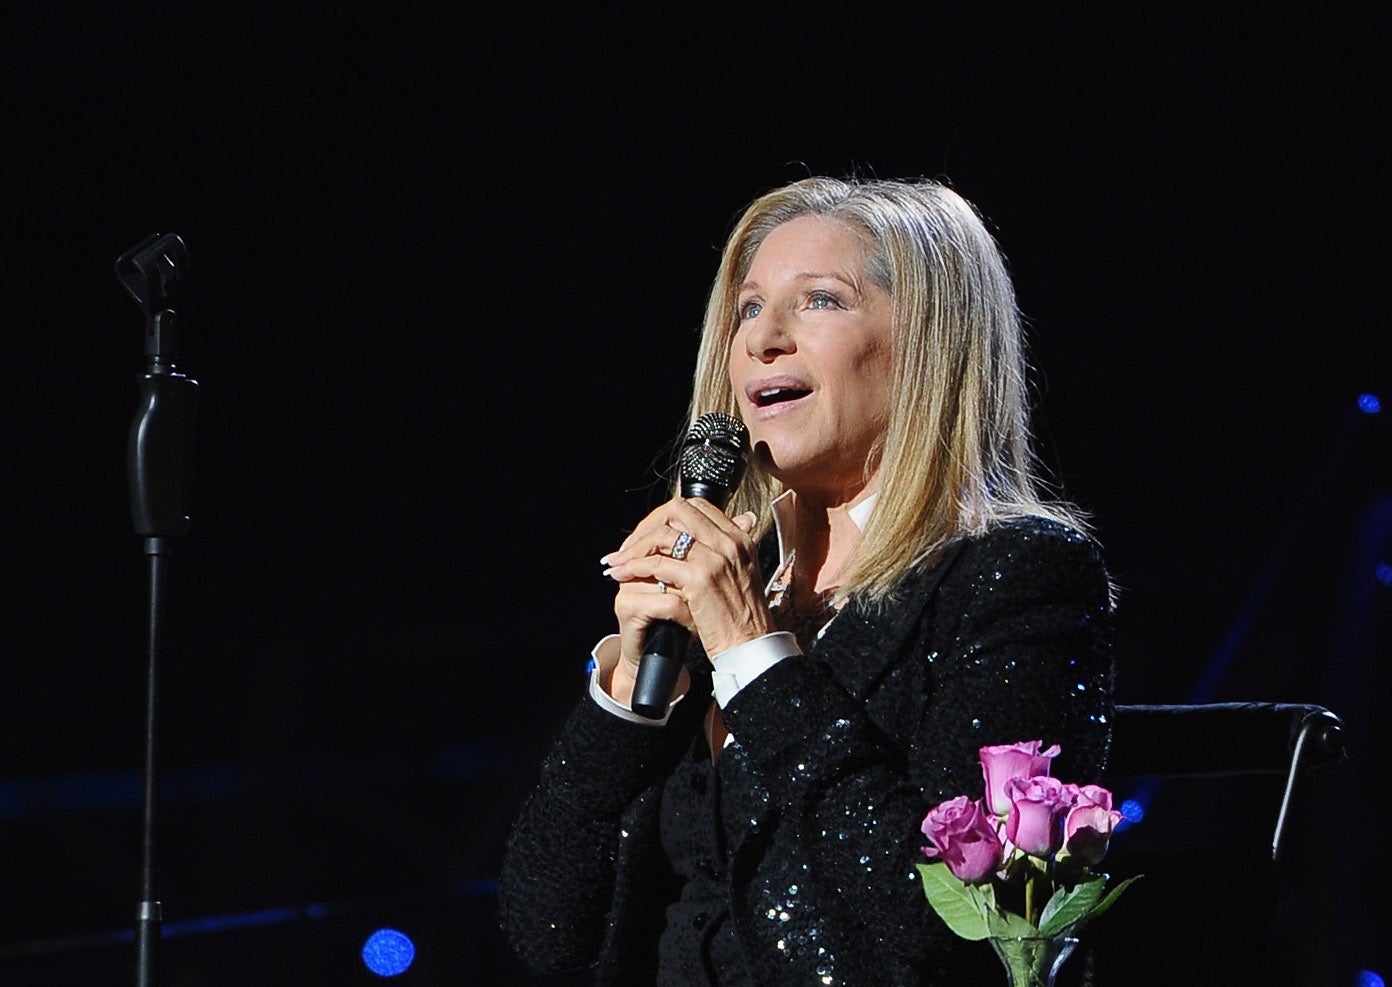 Barbra Streisand will sing at the Oscars for the first time in 36 years